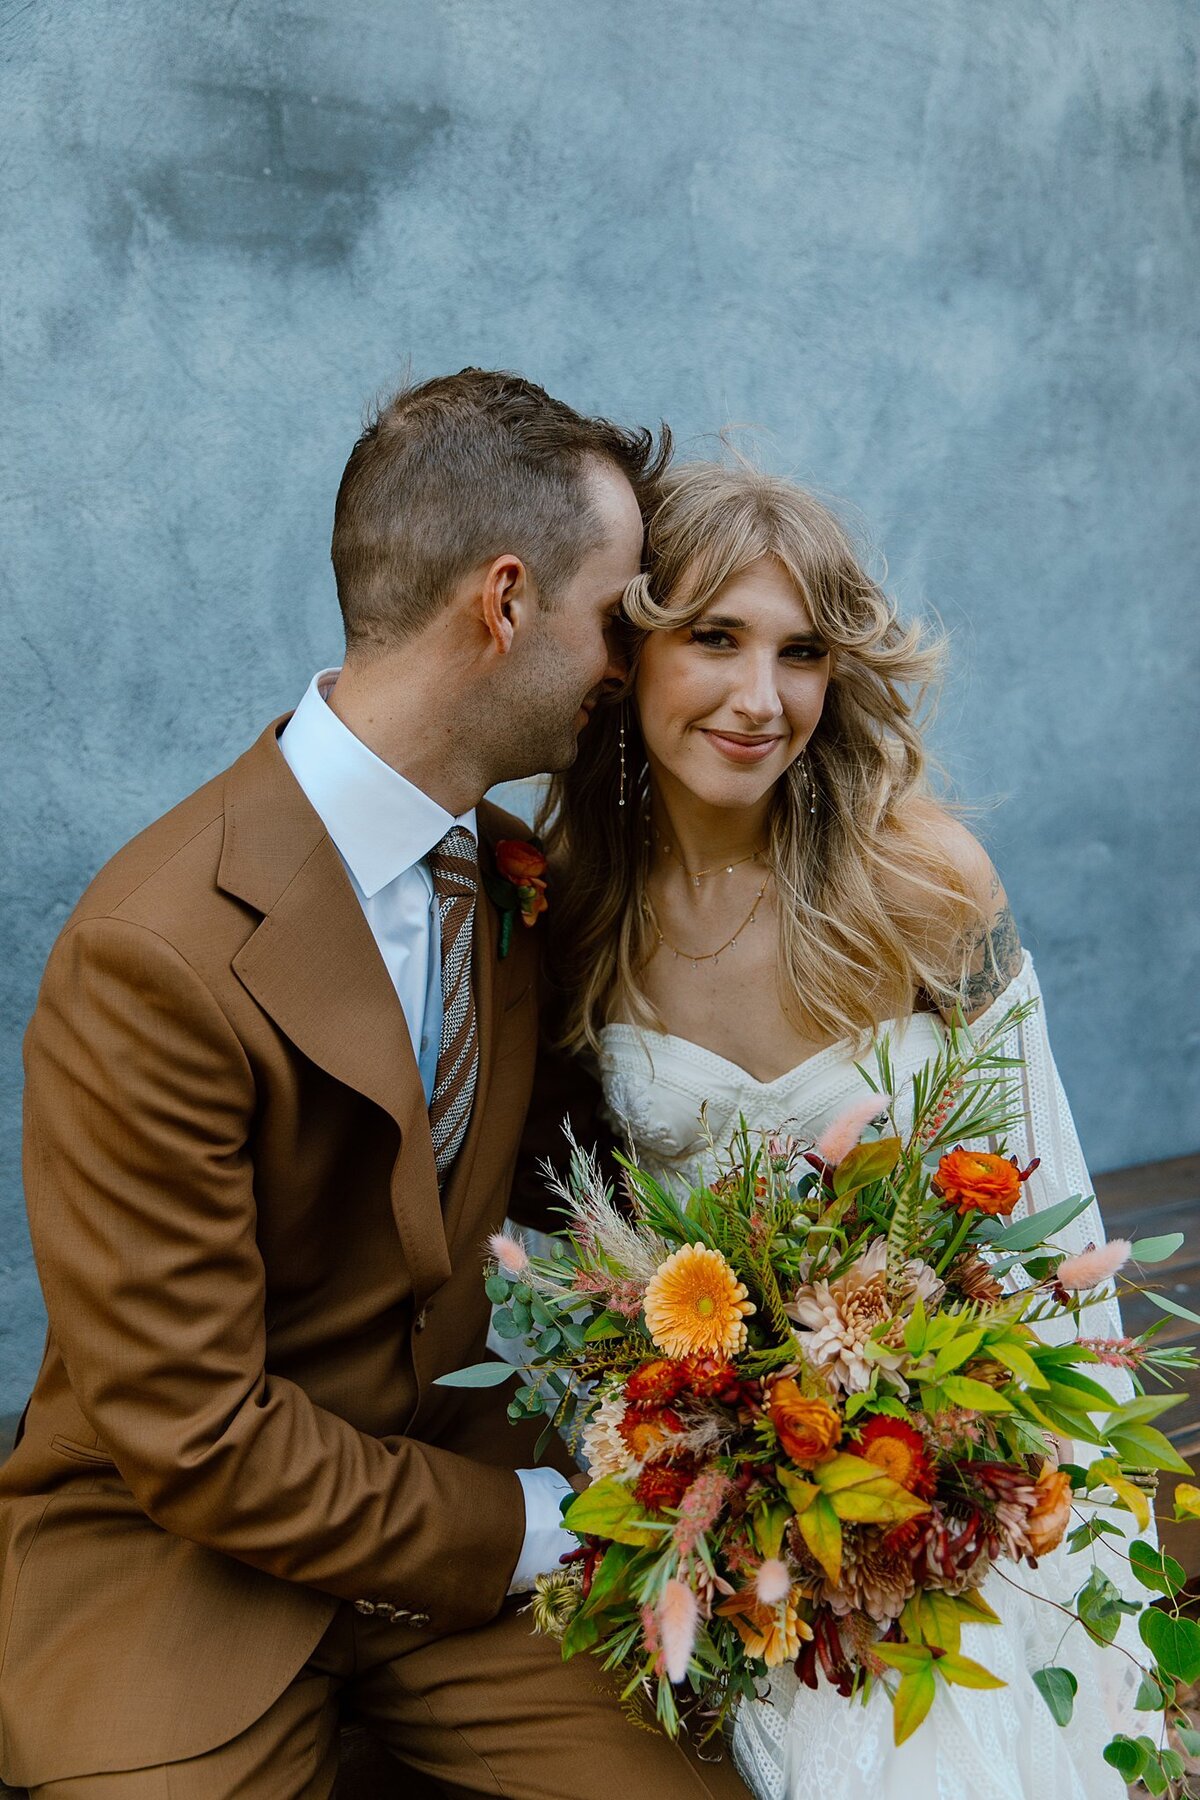 A boho bride in a strapless wedding dress with detached sleeves holds a large bouquet of orange and peach flowers with assorted greenery as the groom, wearing a brown suit kisses her cheek.